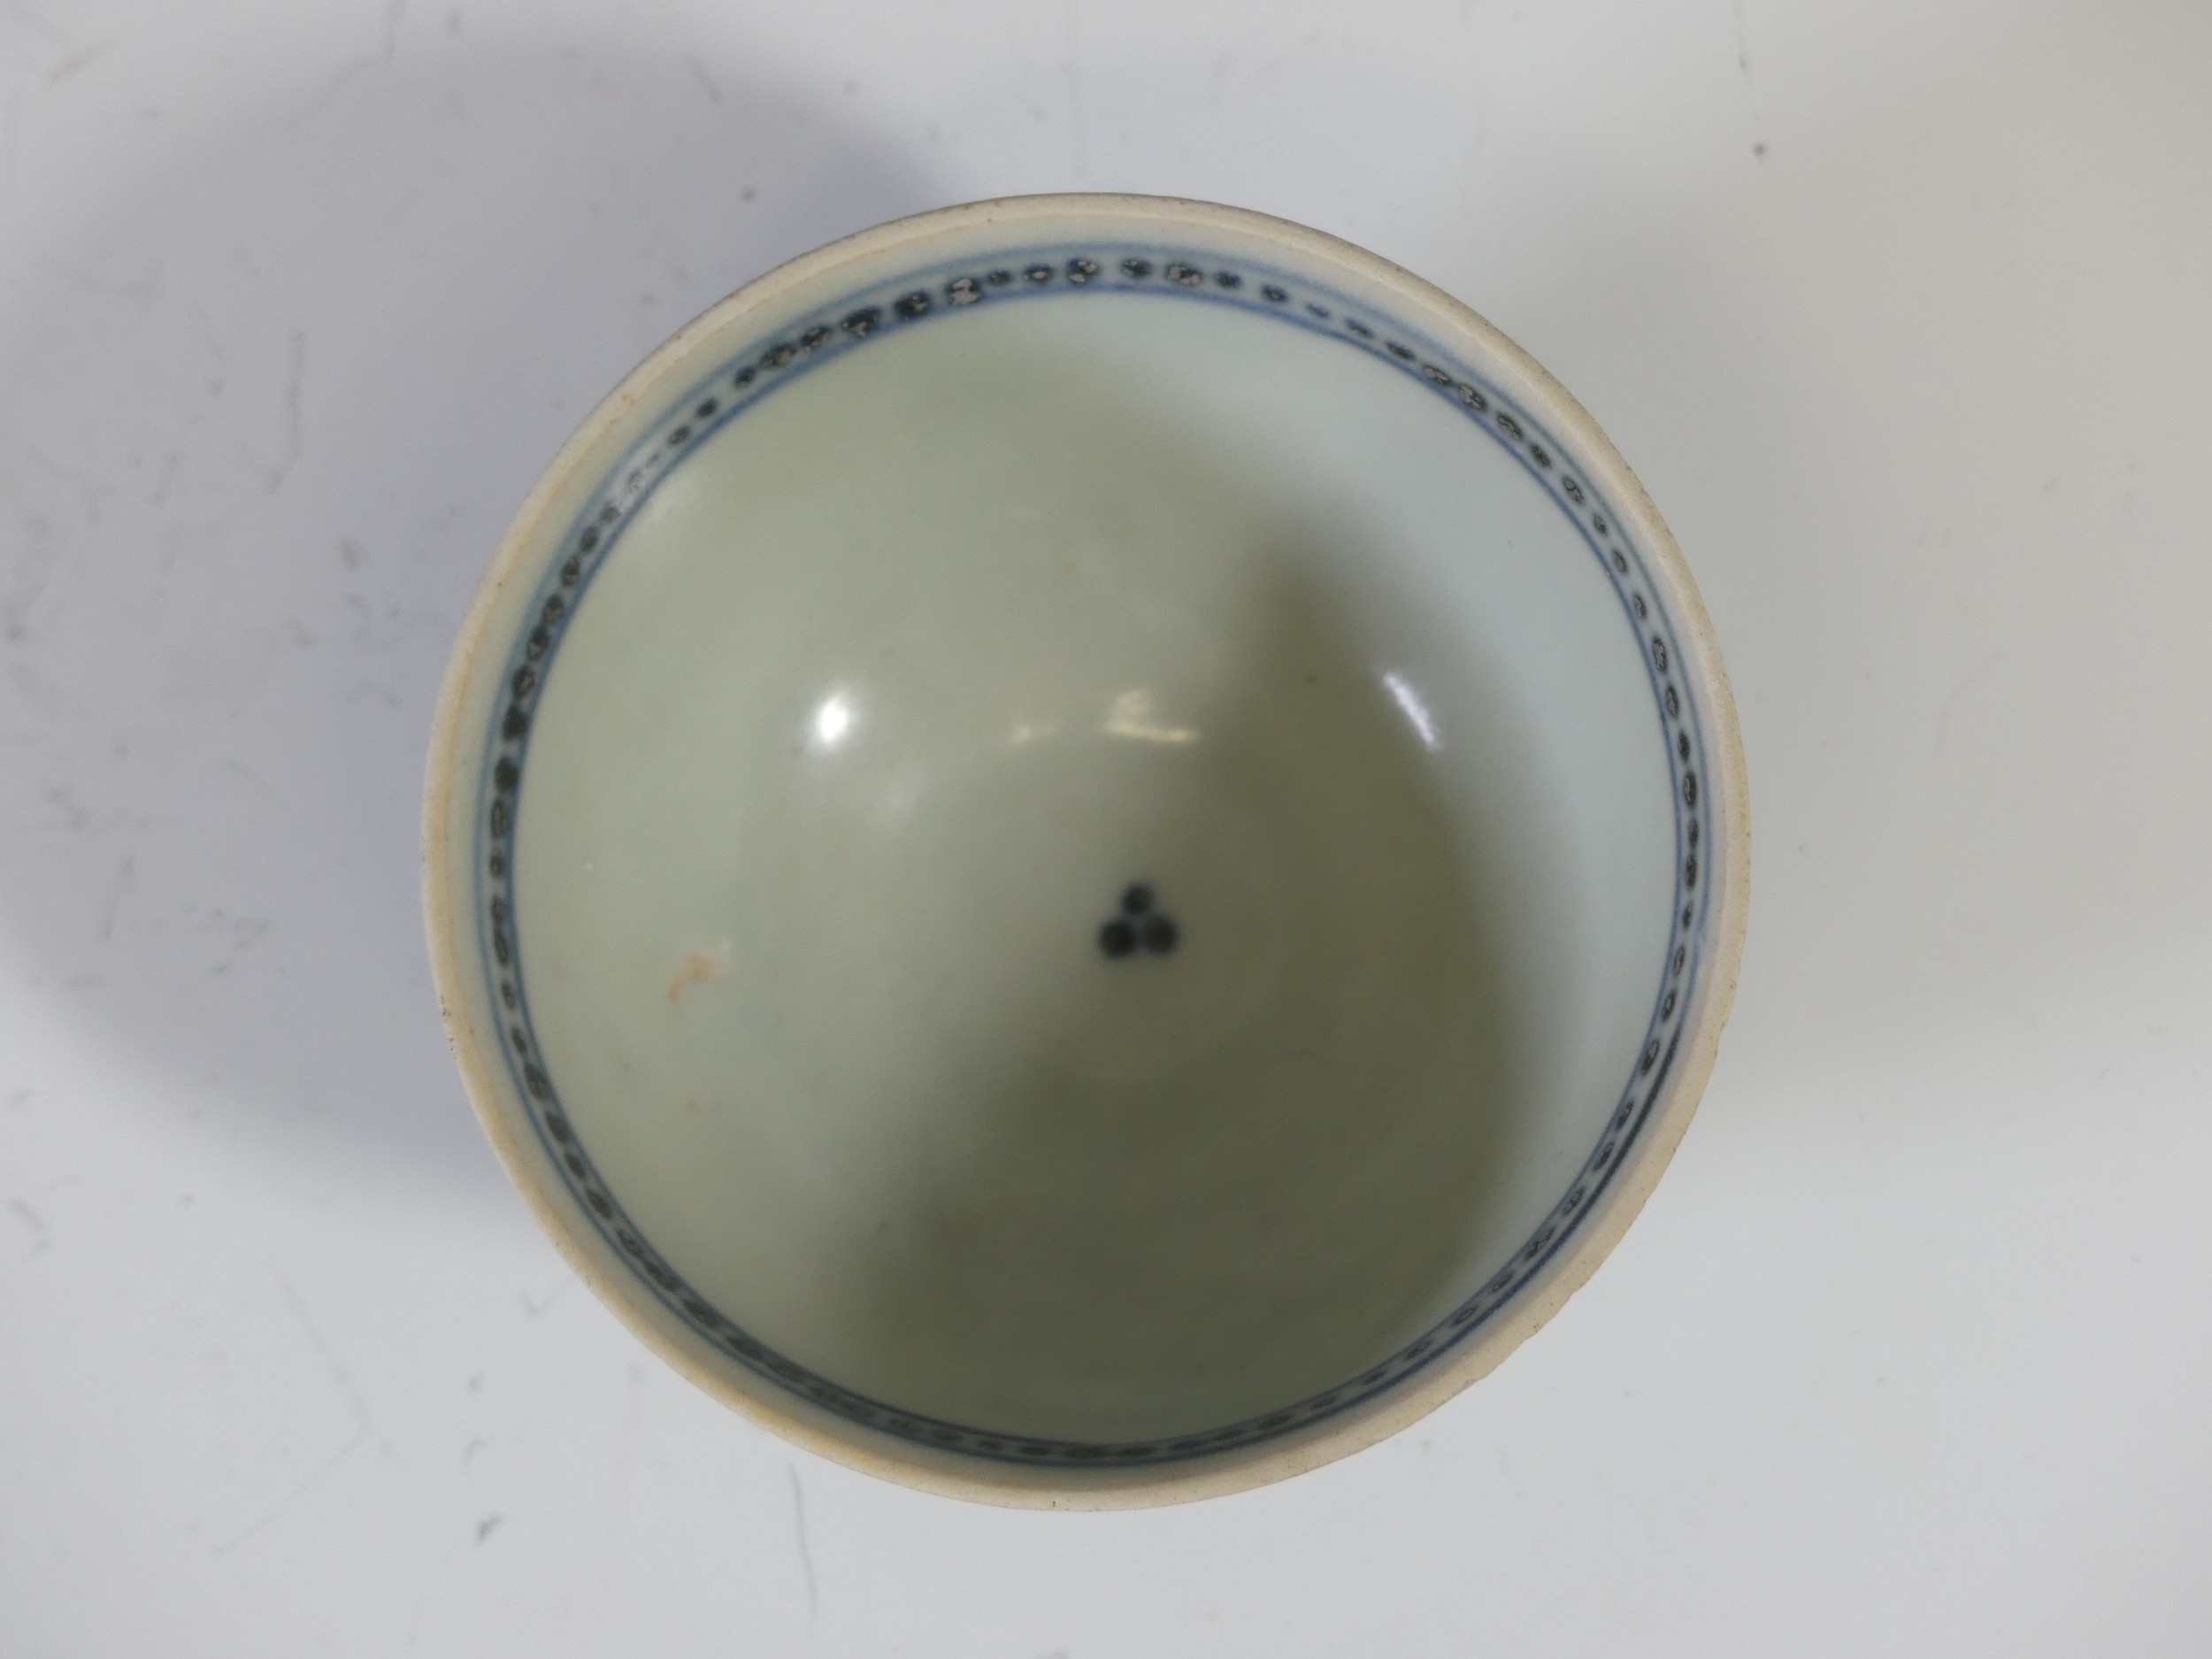 A Chinese Export 'Tek Sing Treasures' blue and white porcelain Tea Bowl and Saucer, decorated with a - Image 4 of 6